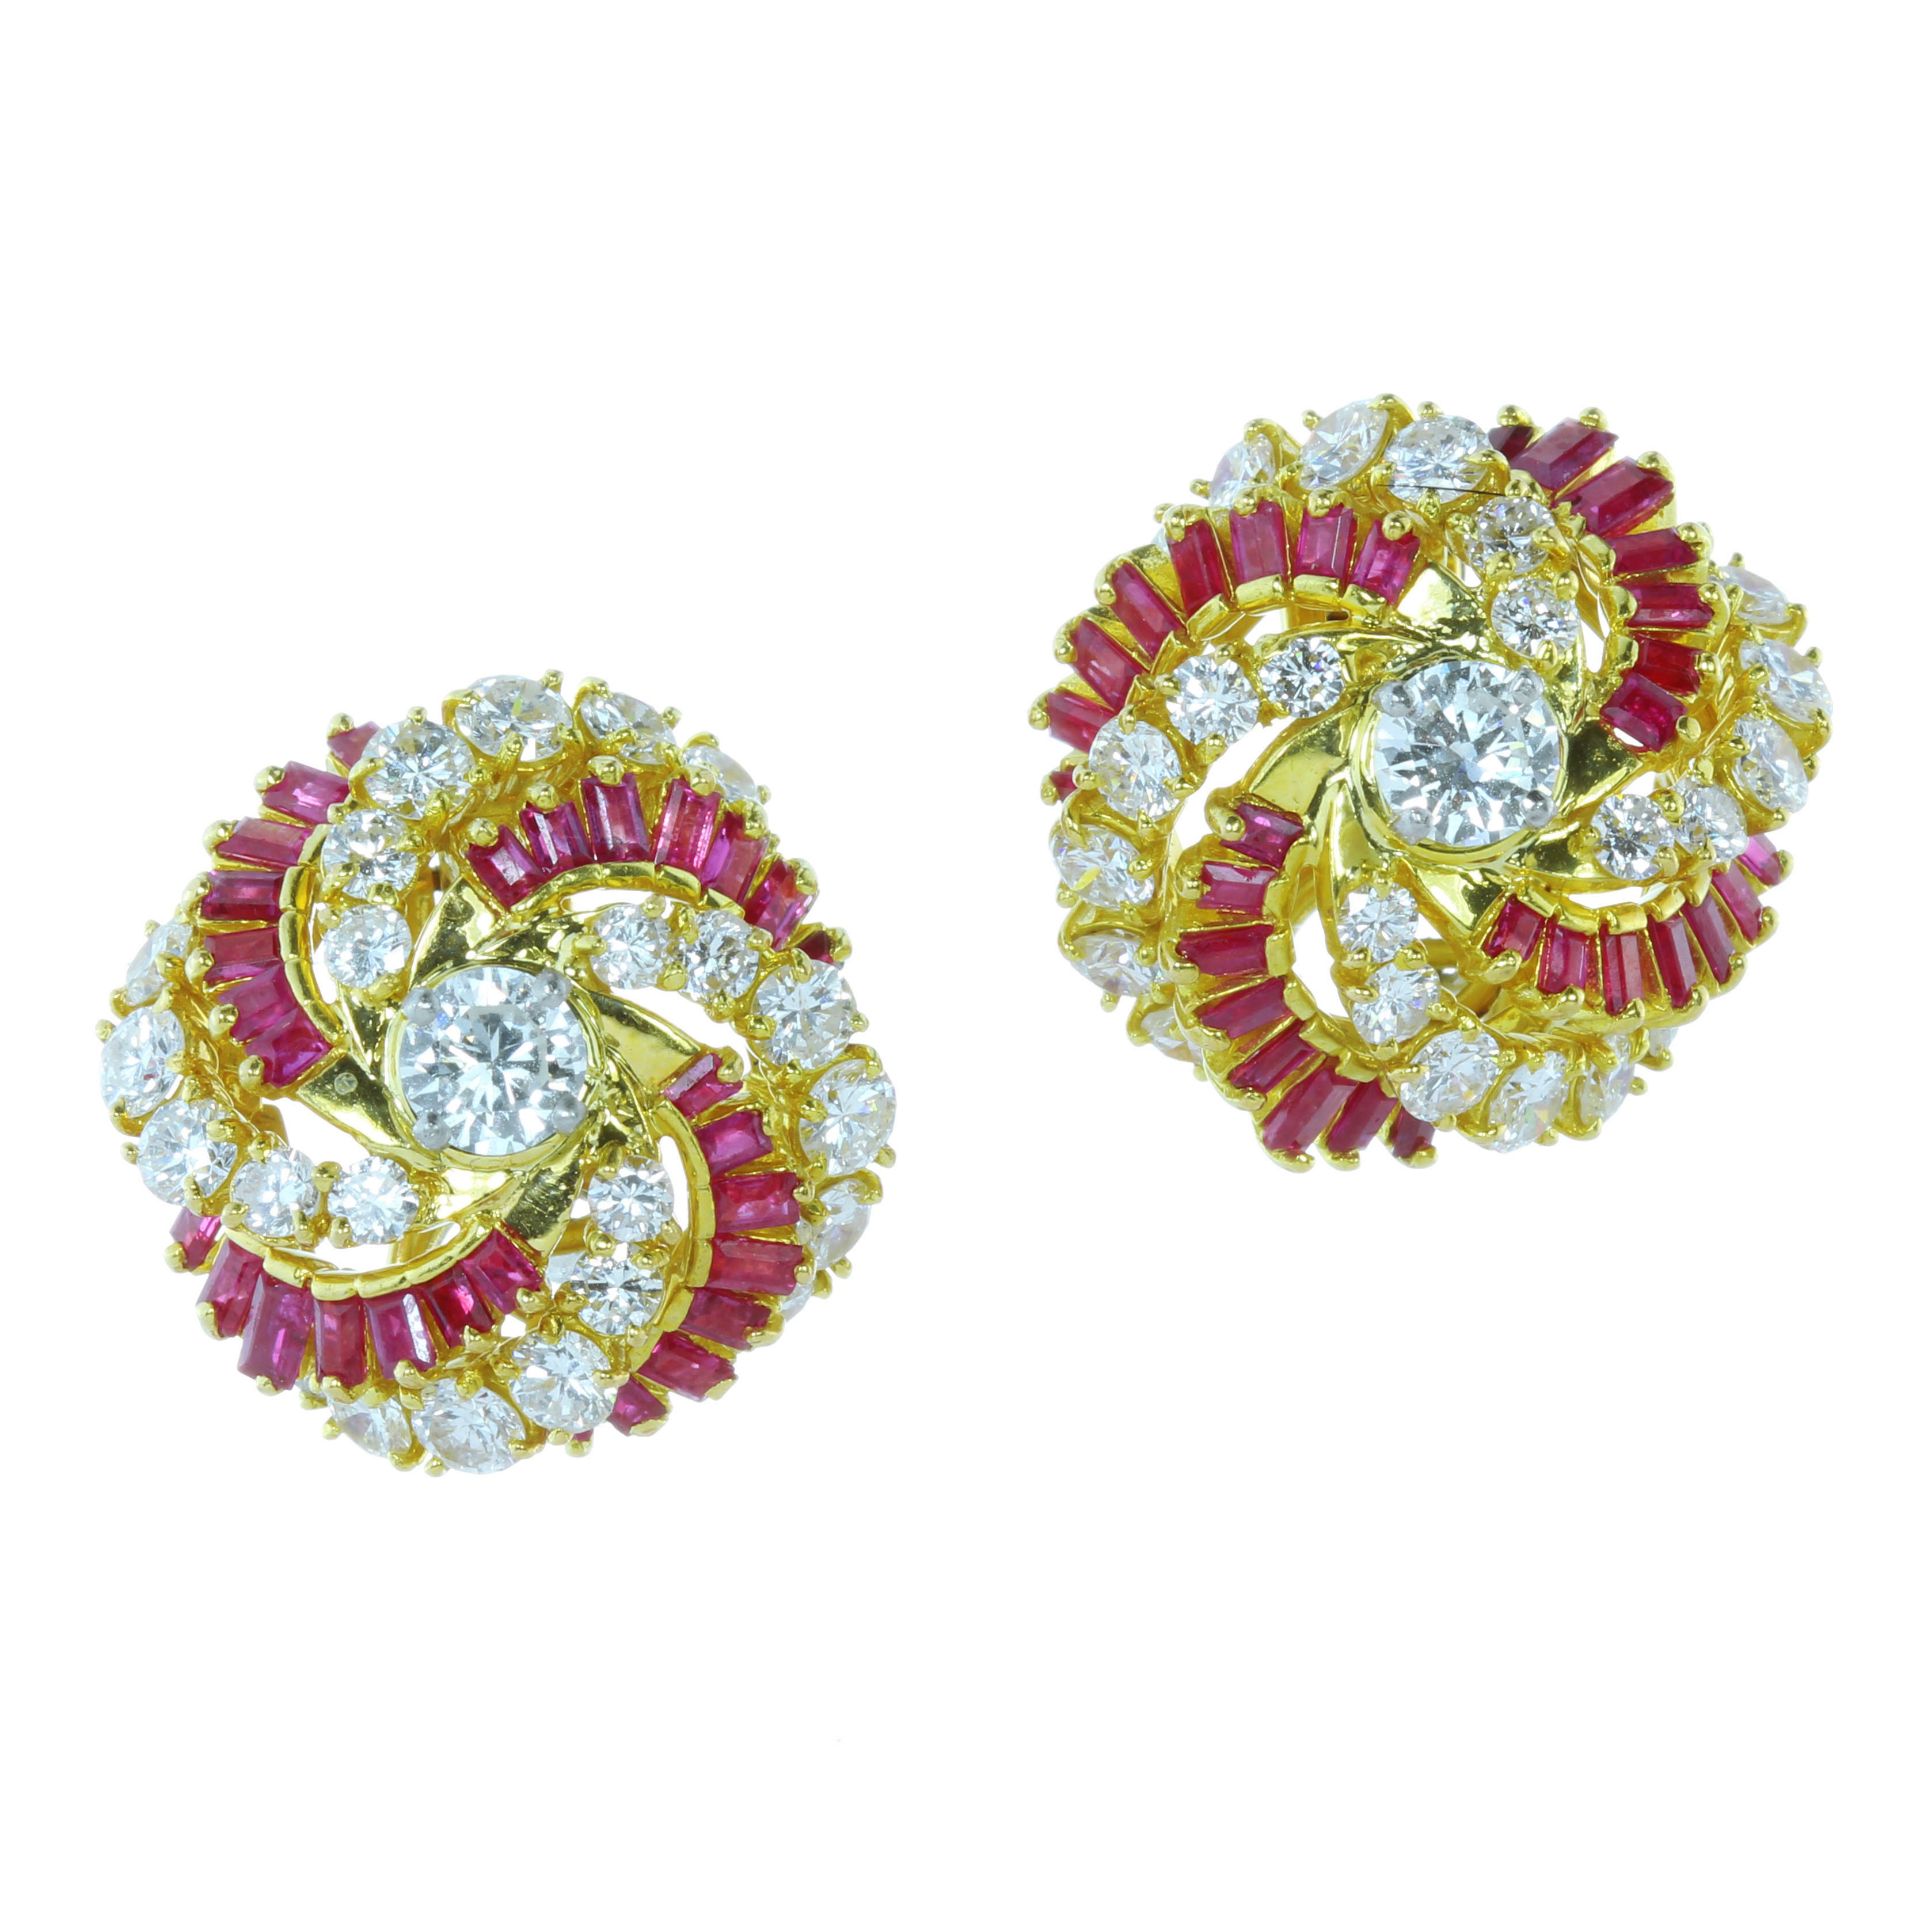 A PAIR OF VINTAGE DIAMOND AND RUBY EARRINGS, KUTCHINSKY CIRCA 1965 in 18ct yellow gold, each earring